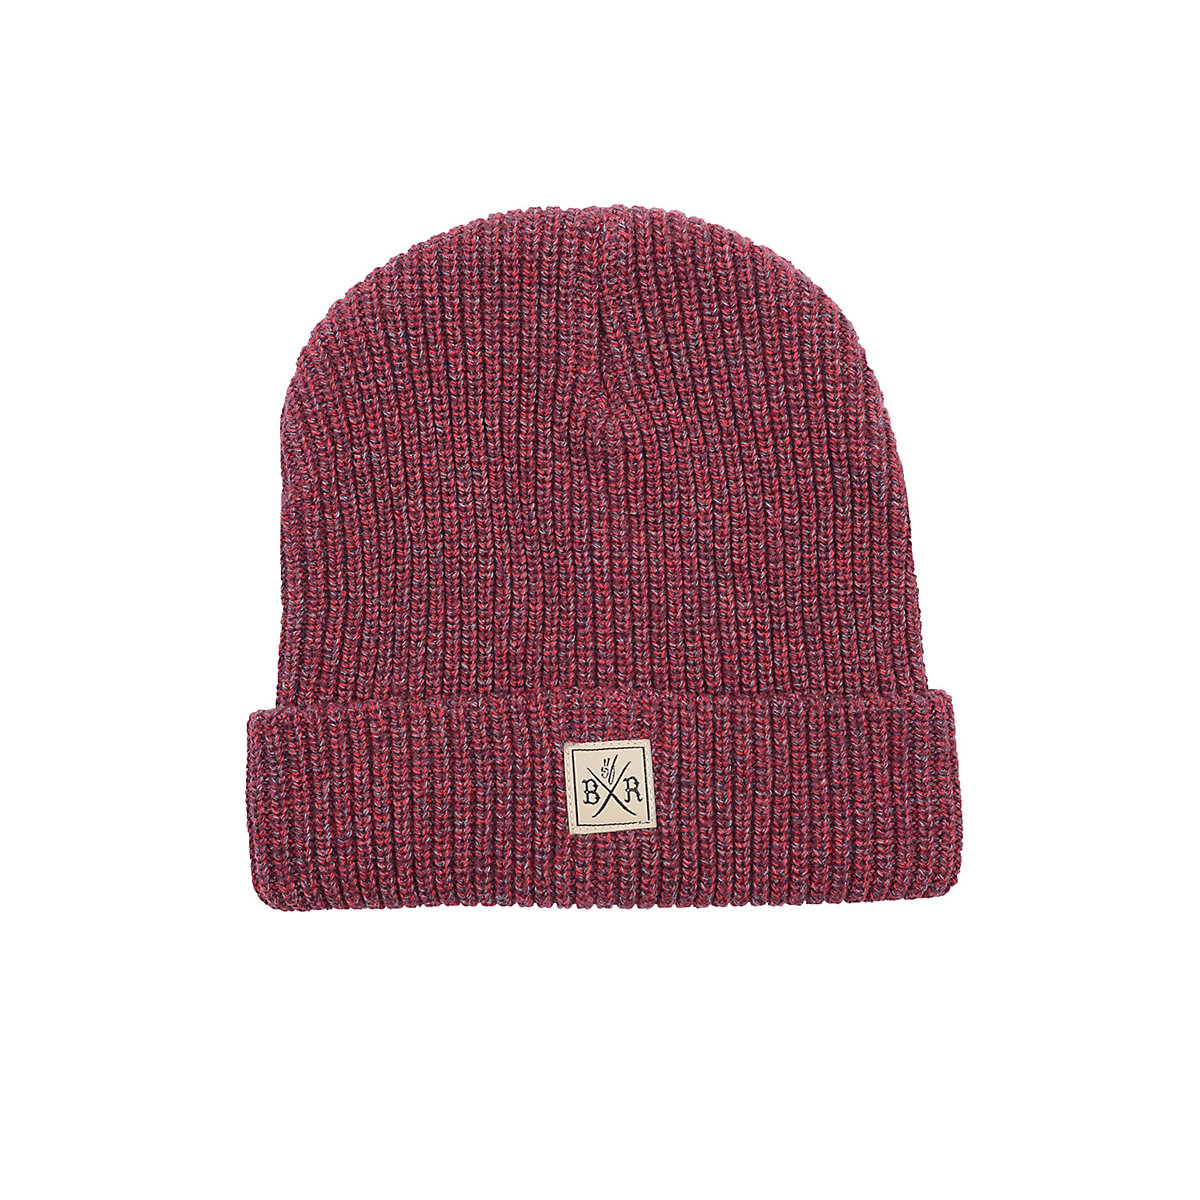 Band of Rascals Beanie Twisted Beanies bordeaux